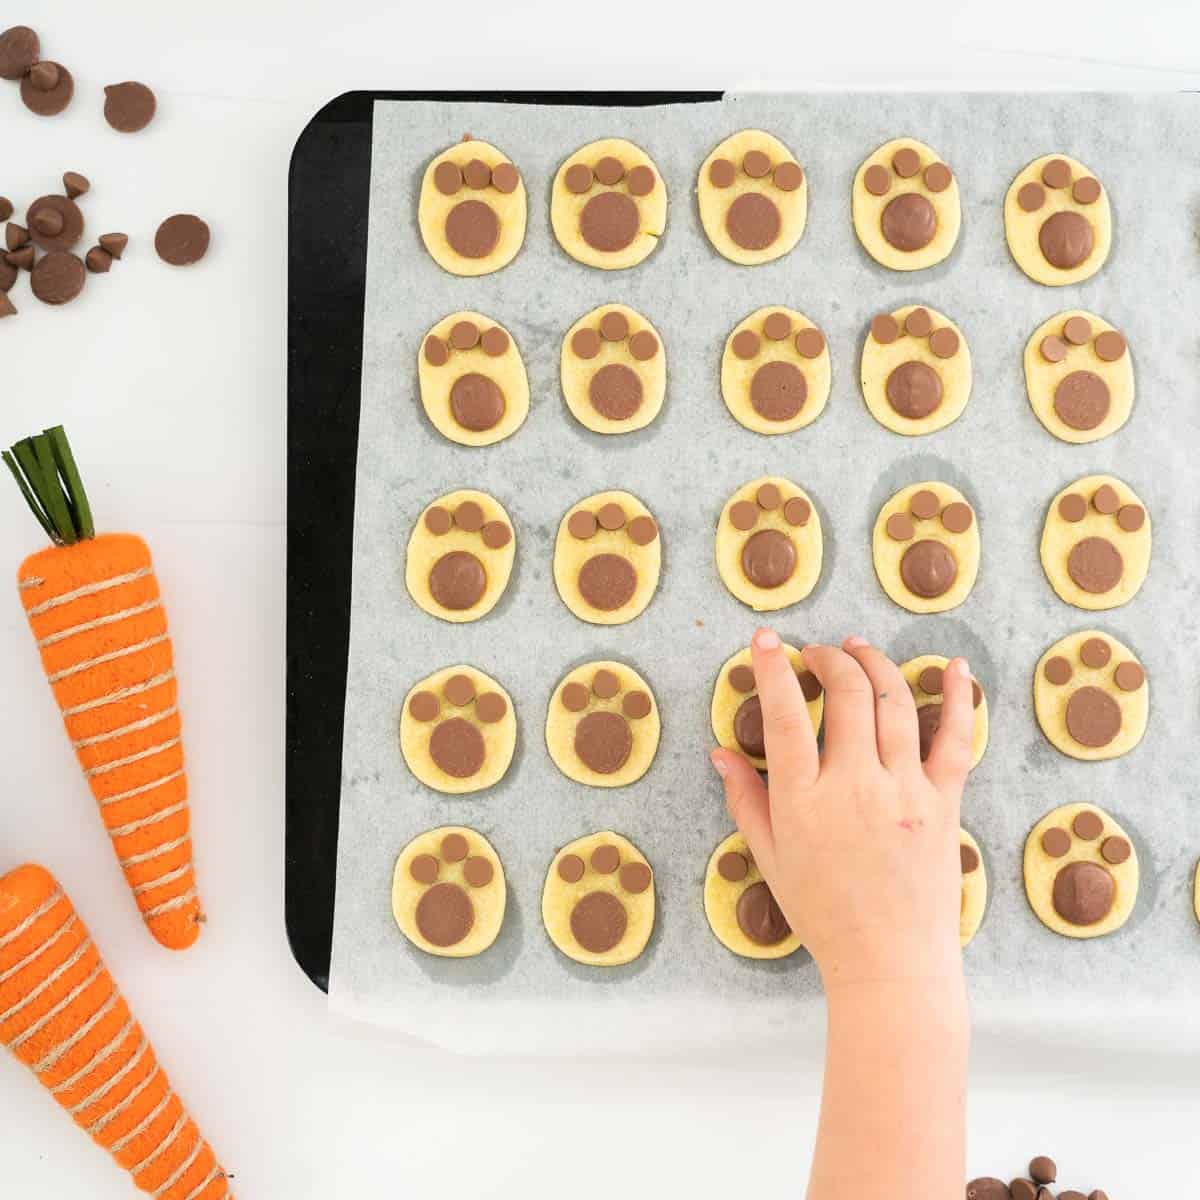 A child's hand reaching for a cookie off a baking sheet full of footprint shaped cookies.